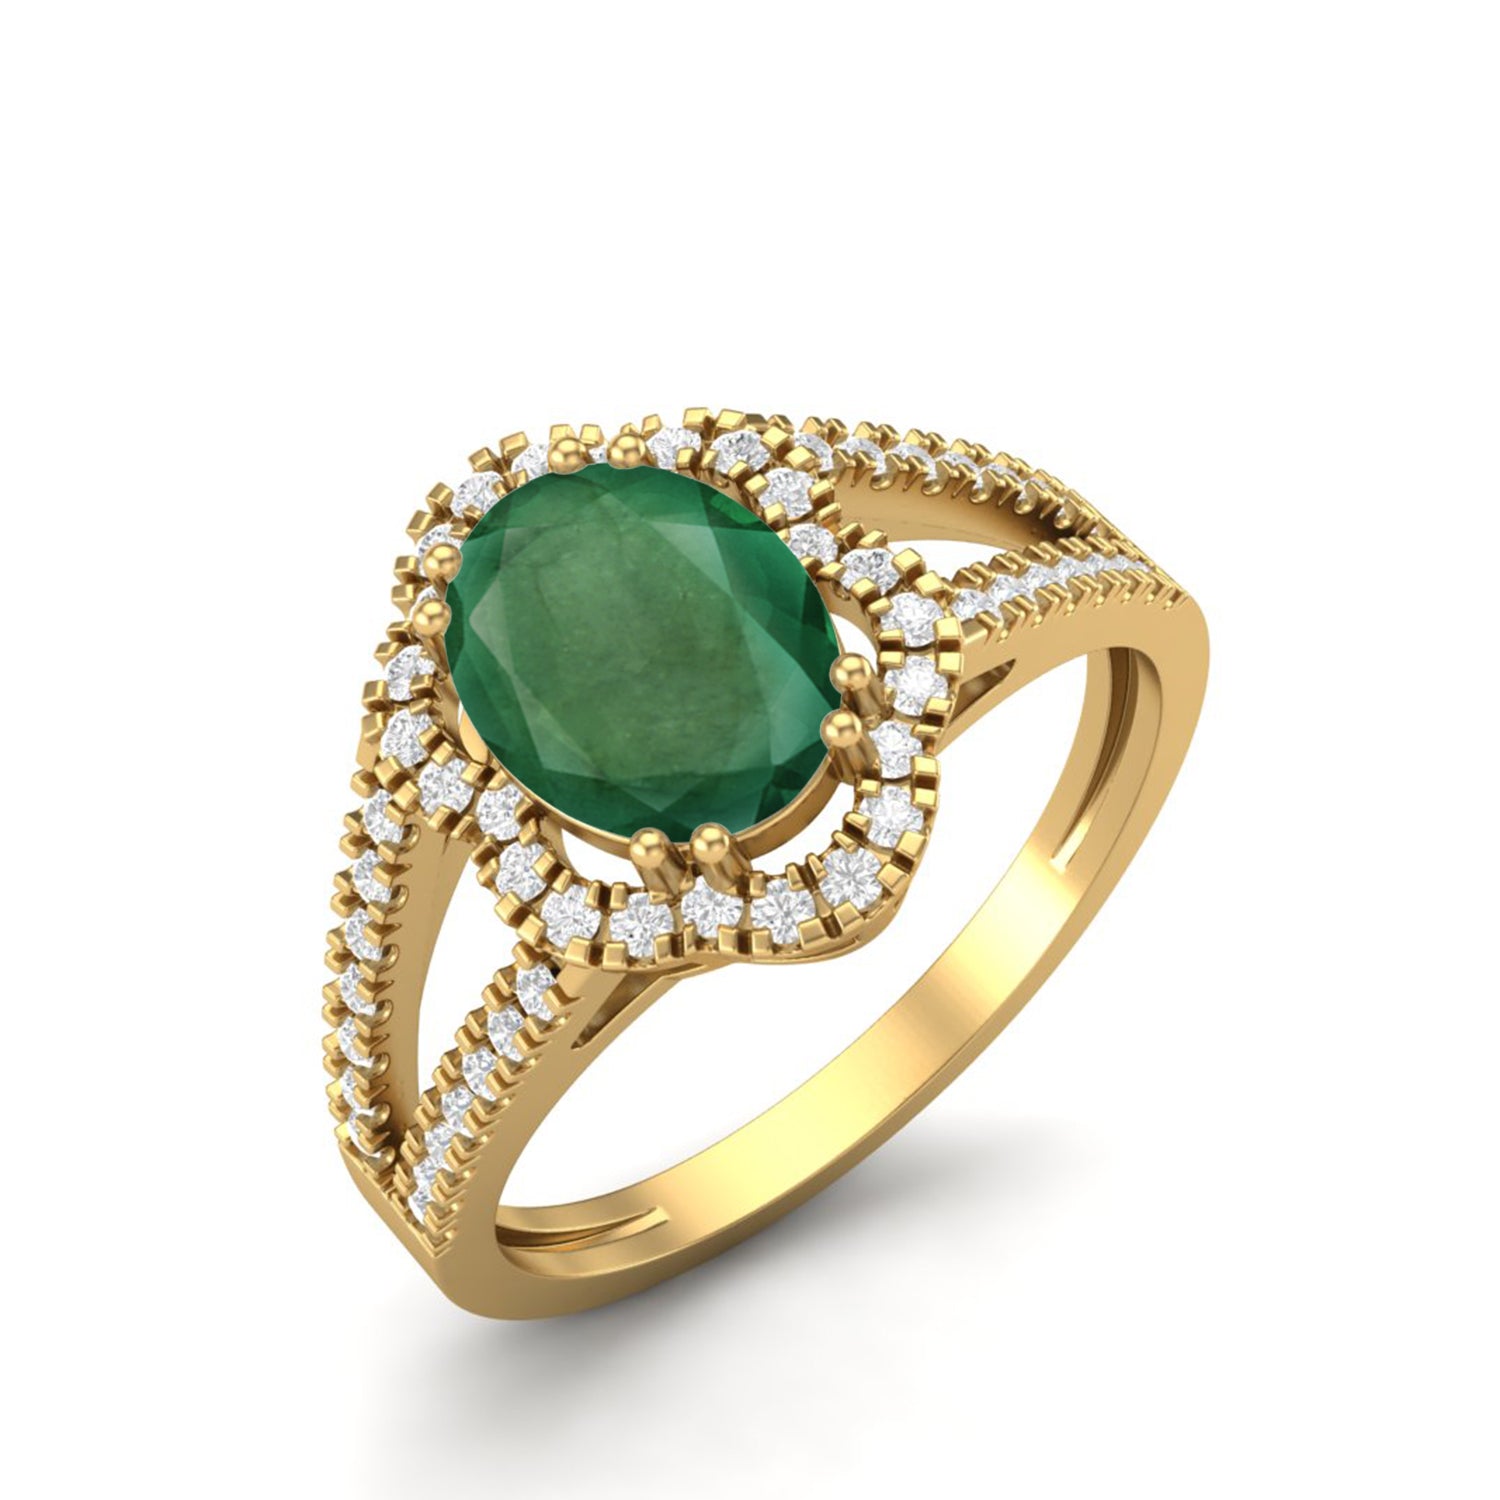 Buy Oval Emerald Ring, 2 Carats 68 Mm Oval Cut Three Stone Style Emerald  Engagement Ring, May Birthstone Promise Ring, Green Gemstone Ring Online in  India - Etsy